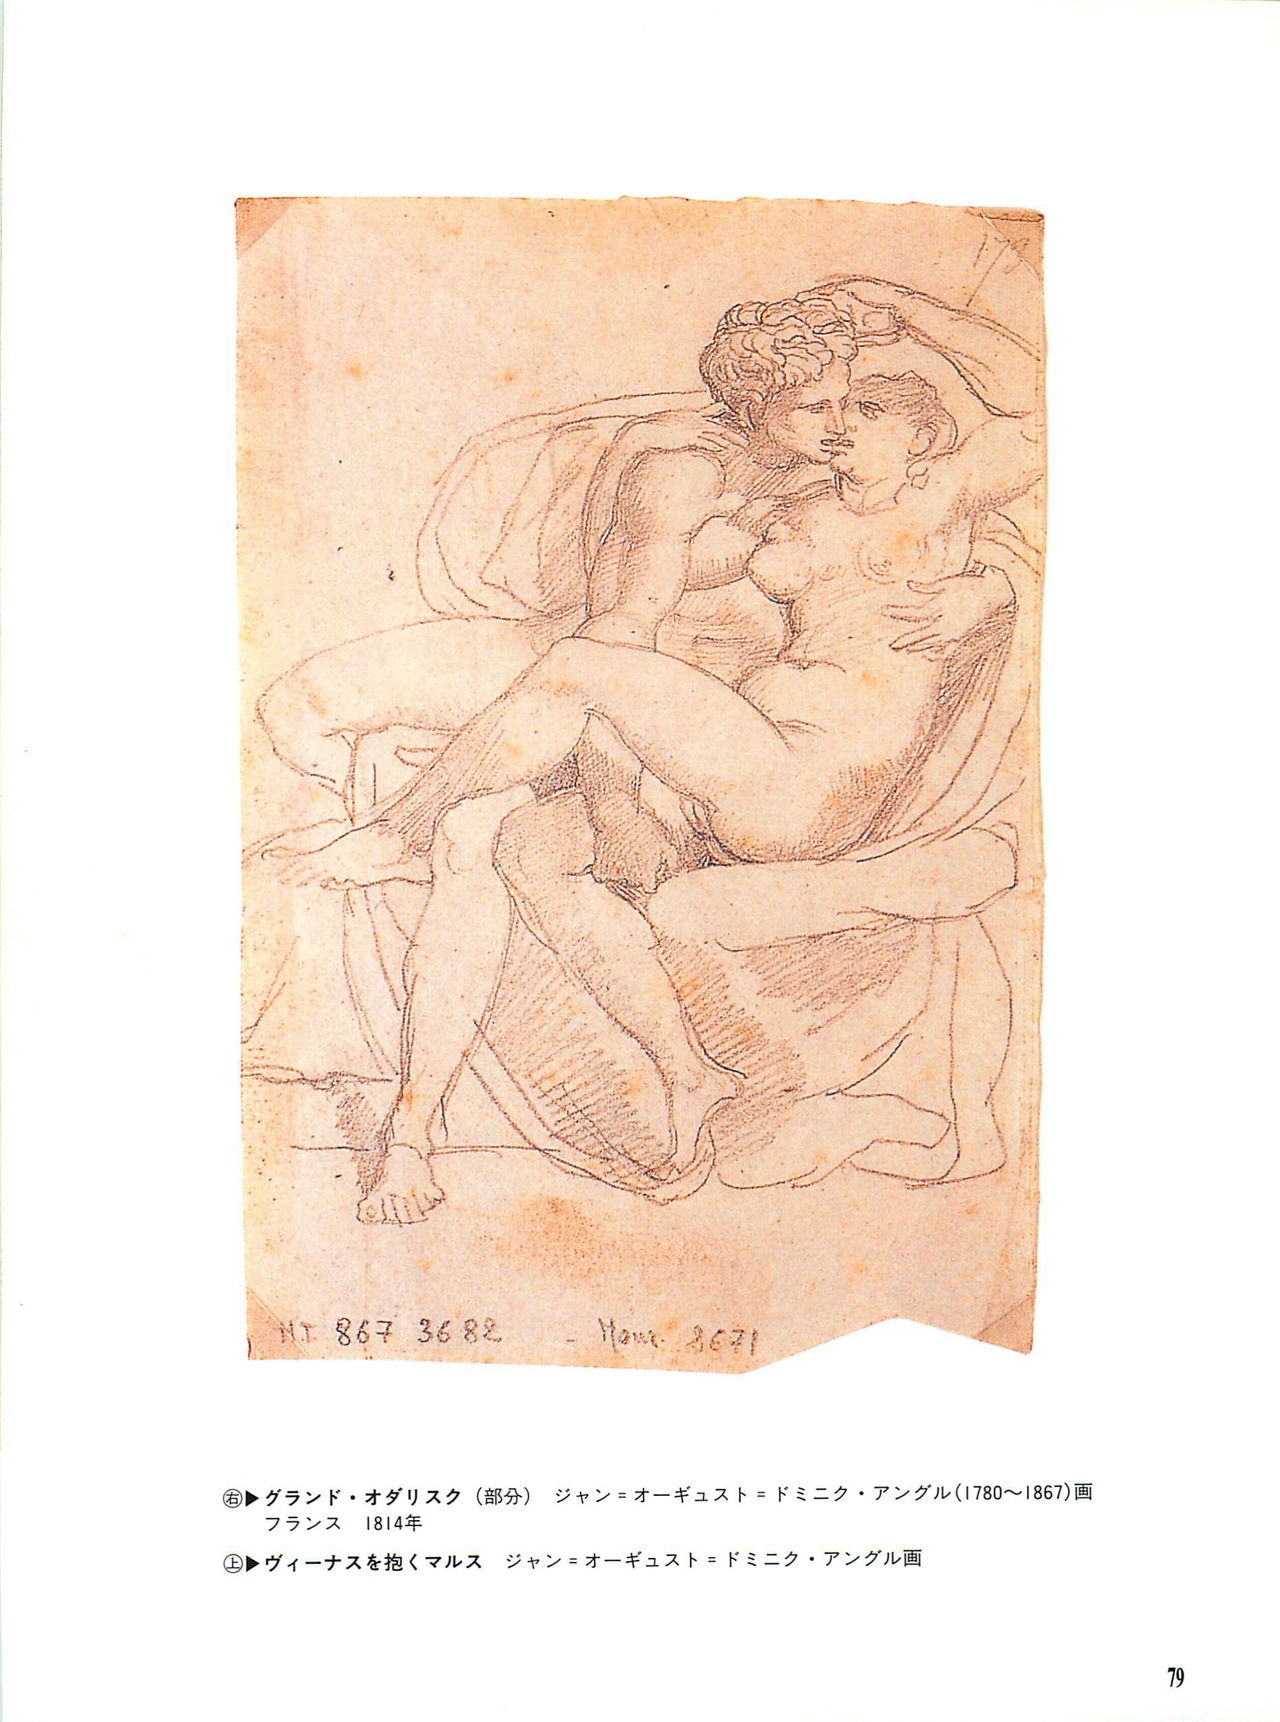 World of Eros: Erotic pieces of the masters 82